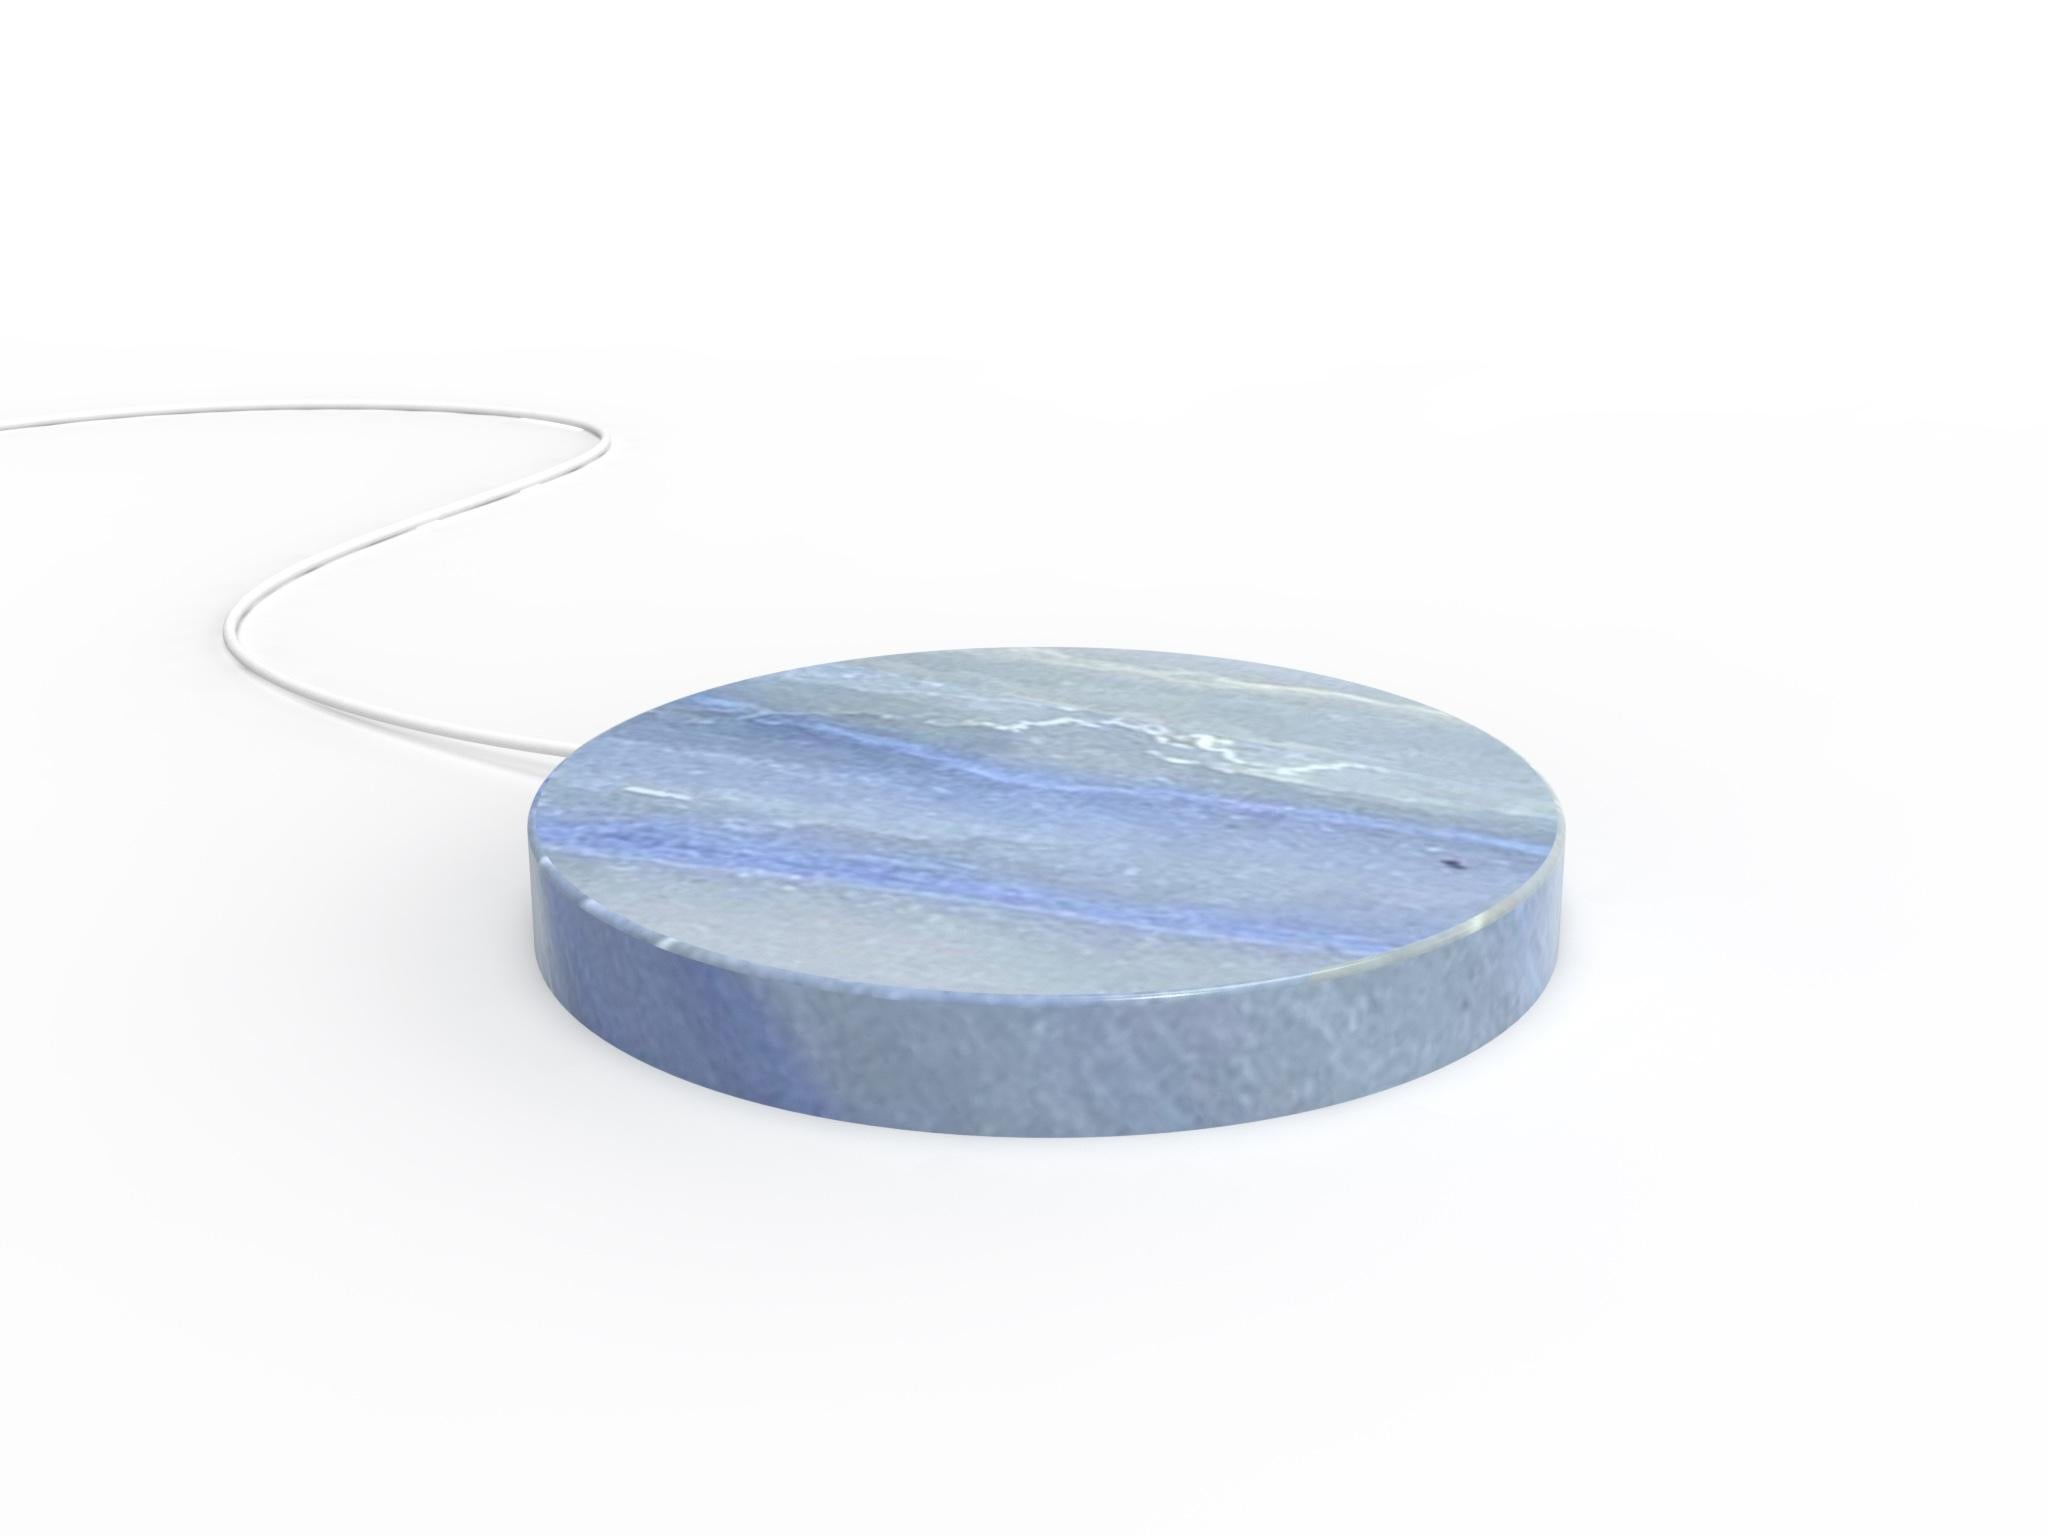 A Marble base,
that quickly charge your phone, with a touch of magic.
 
A circle, 
a stone, 
realized with the care that Marble requires.

A powerful wireless charging technology ensures an efficient and reliable power delivery.

The result is a